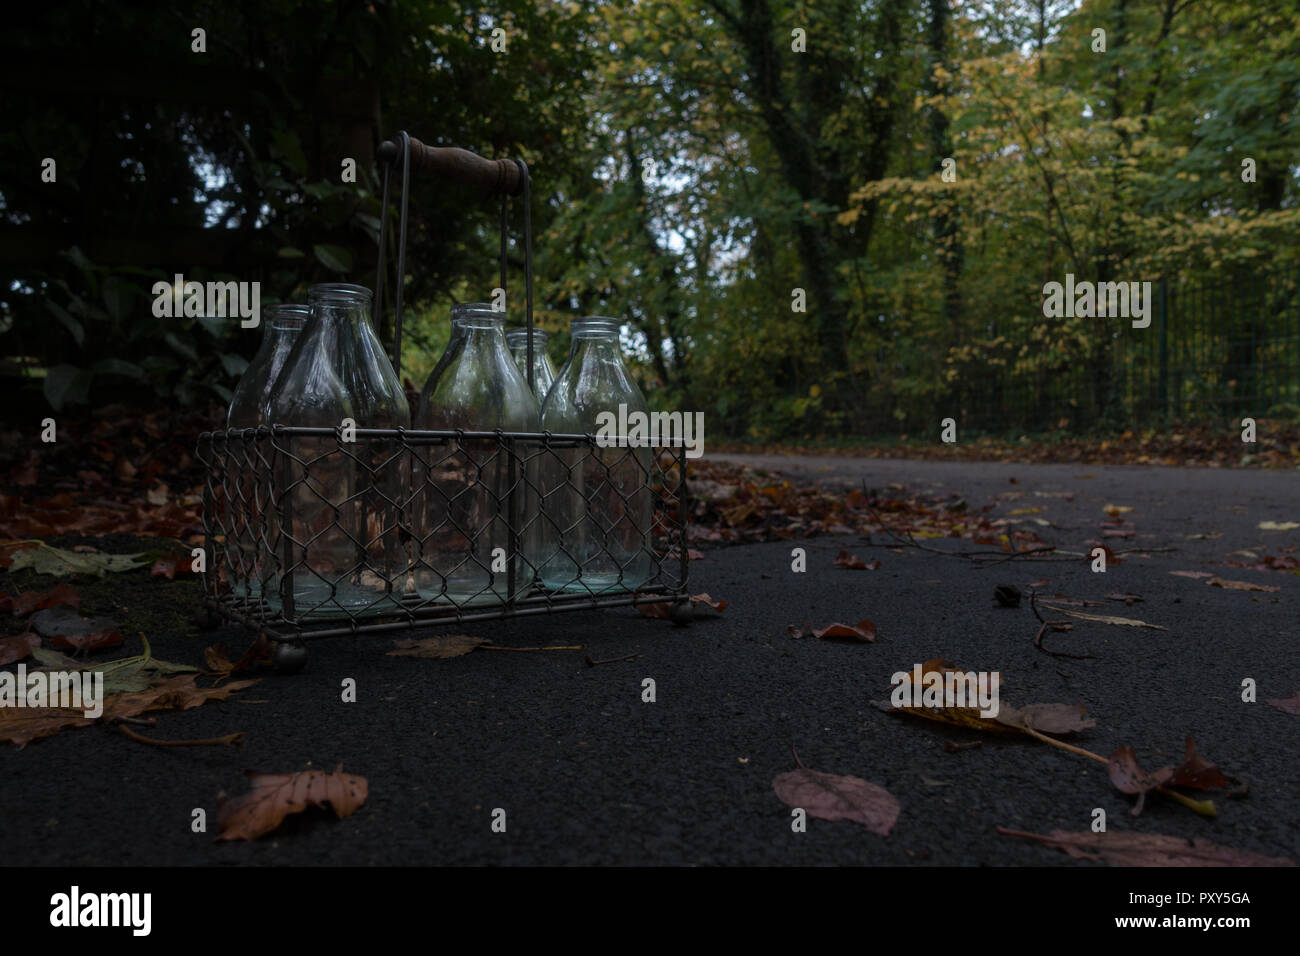 Empty milk bottles left outside for collection in autumn, UK Stock Photo